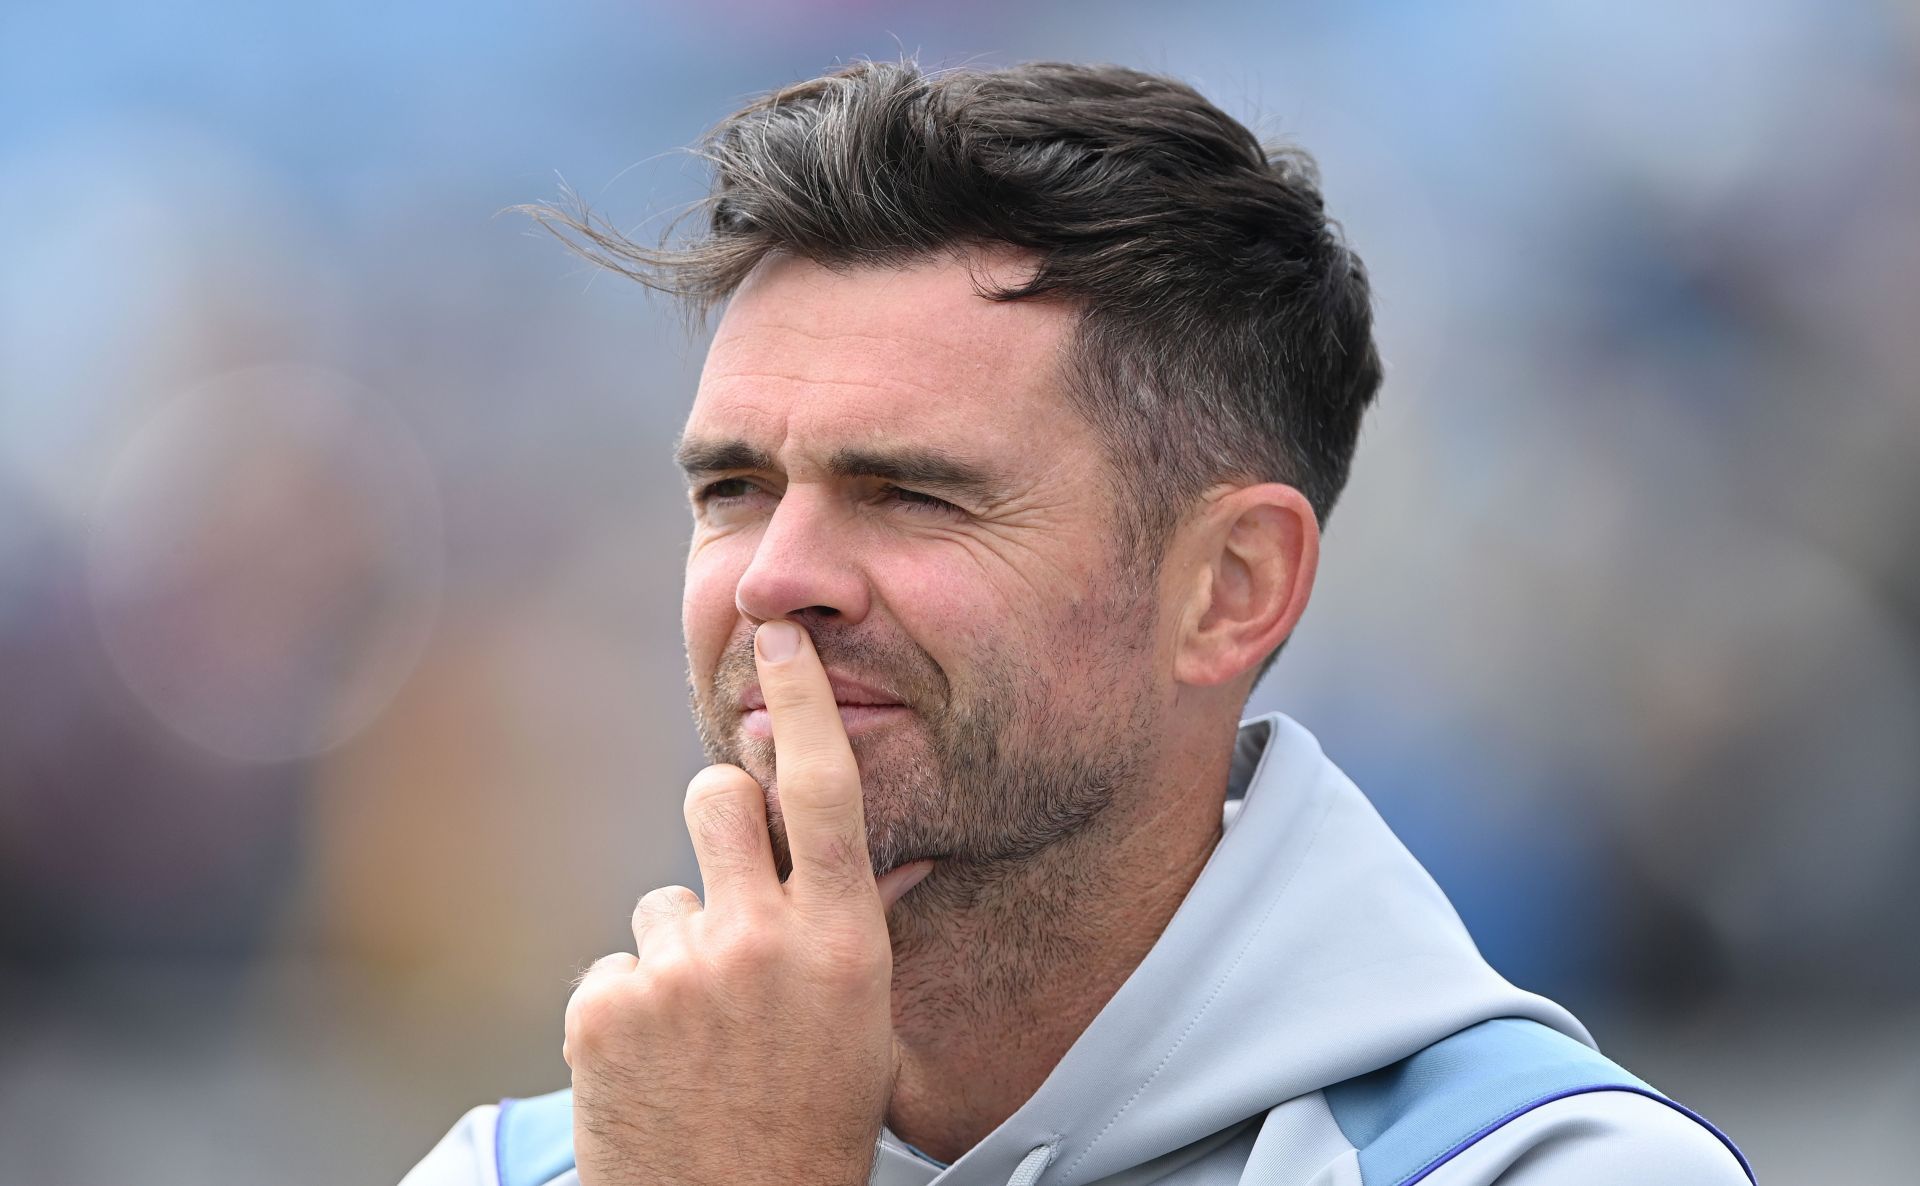 James Anderson missed the third Test vs New Zealand due to an ankle injury.